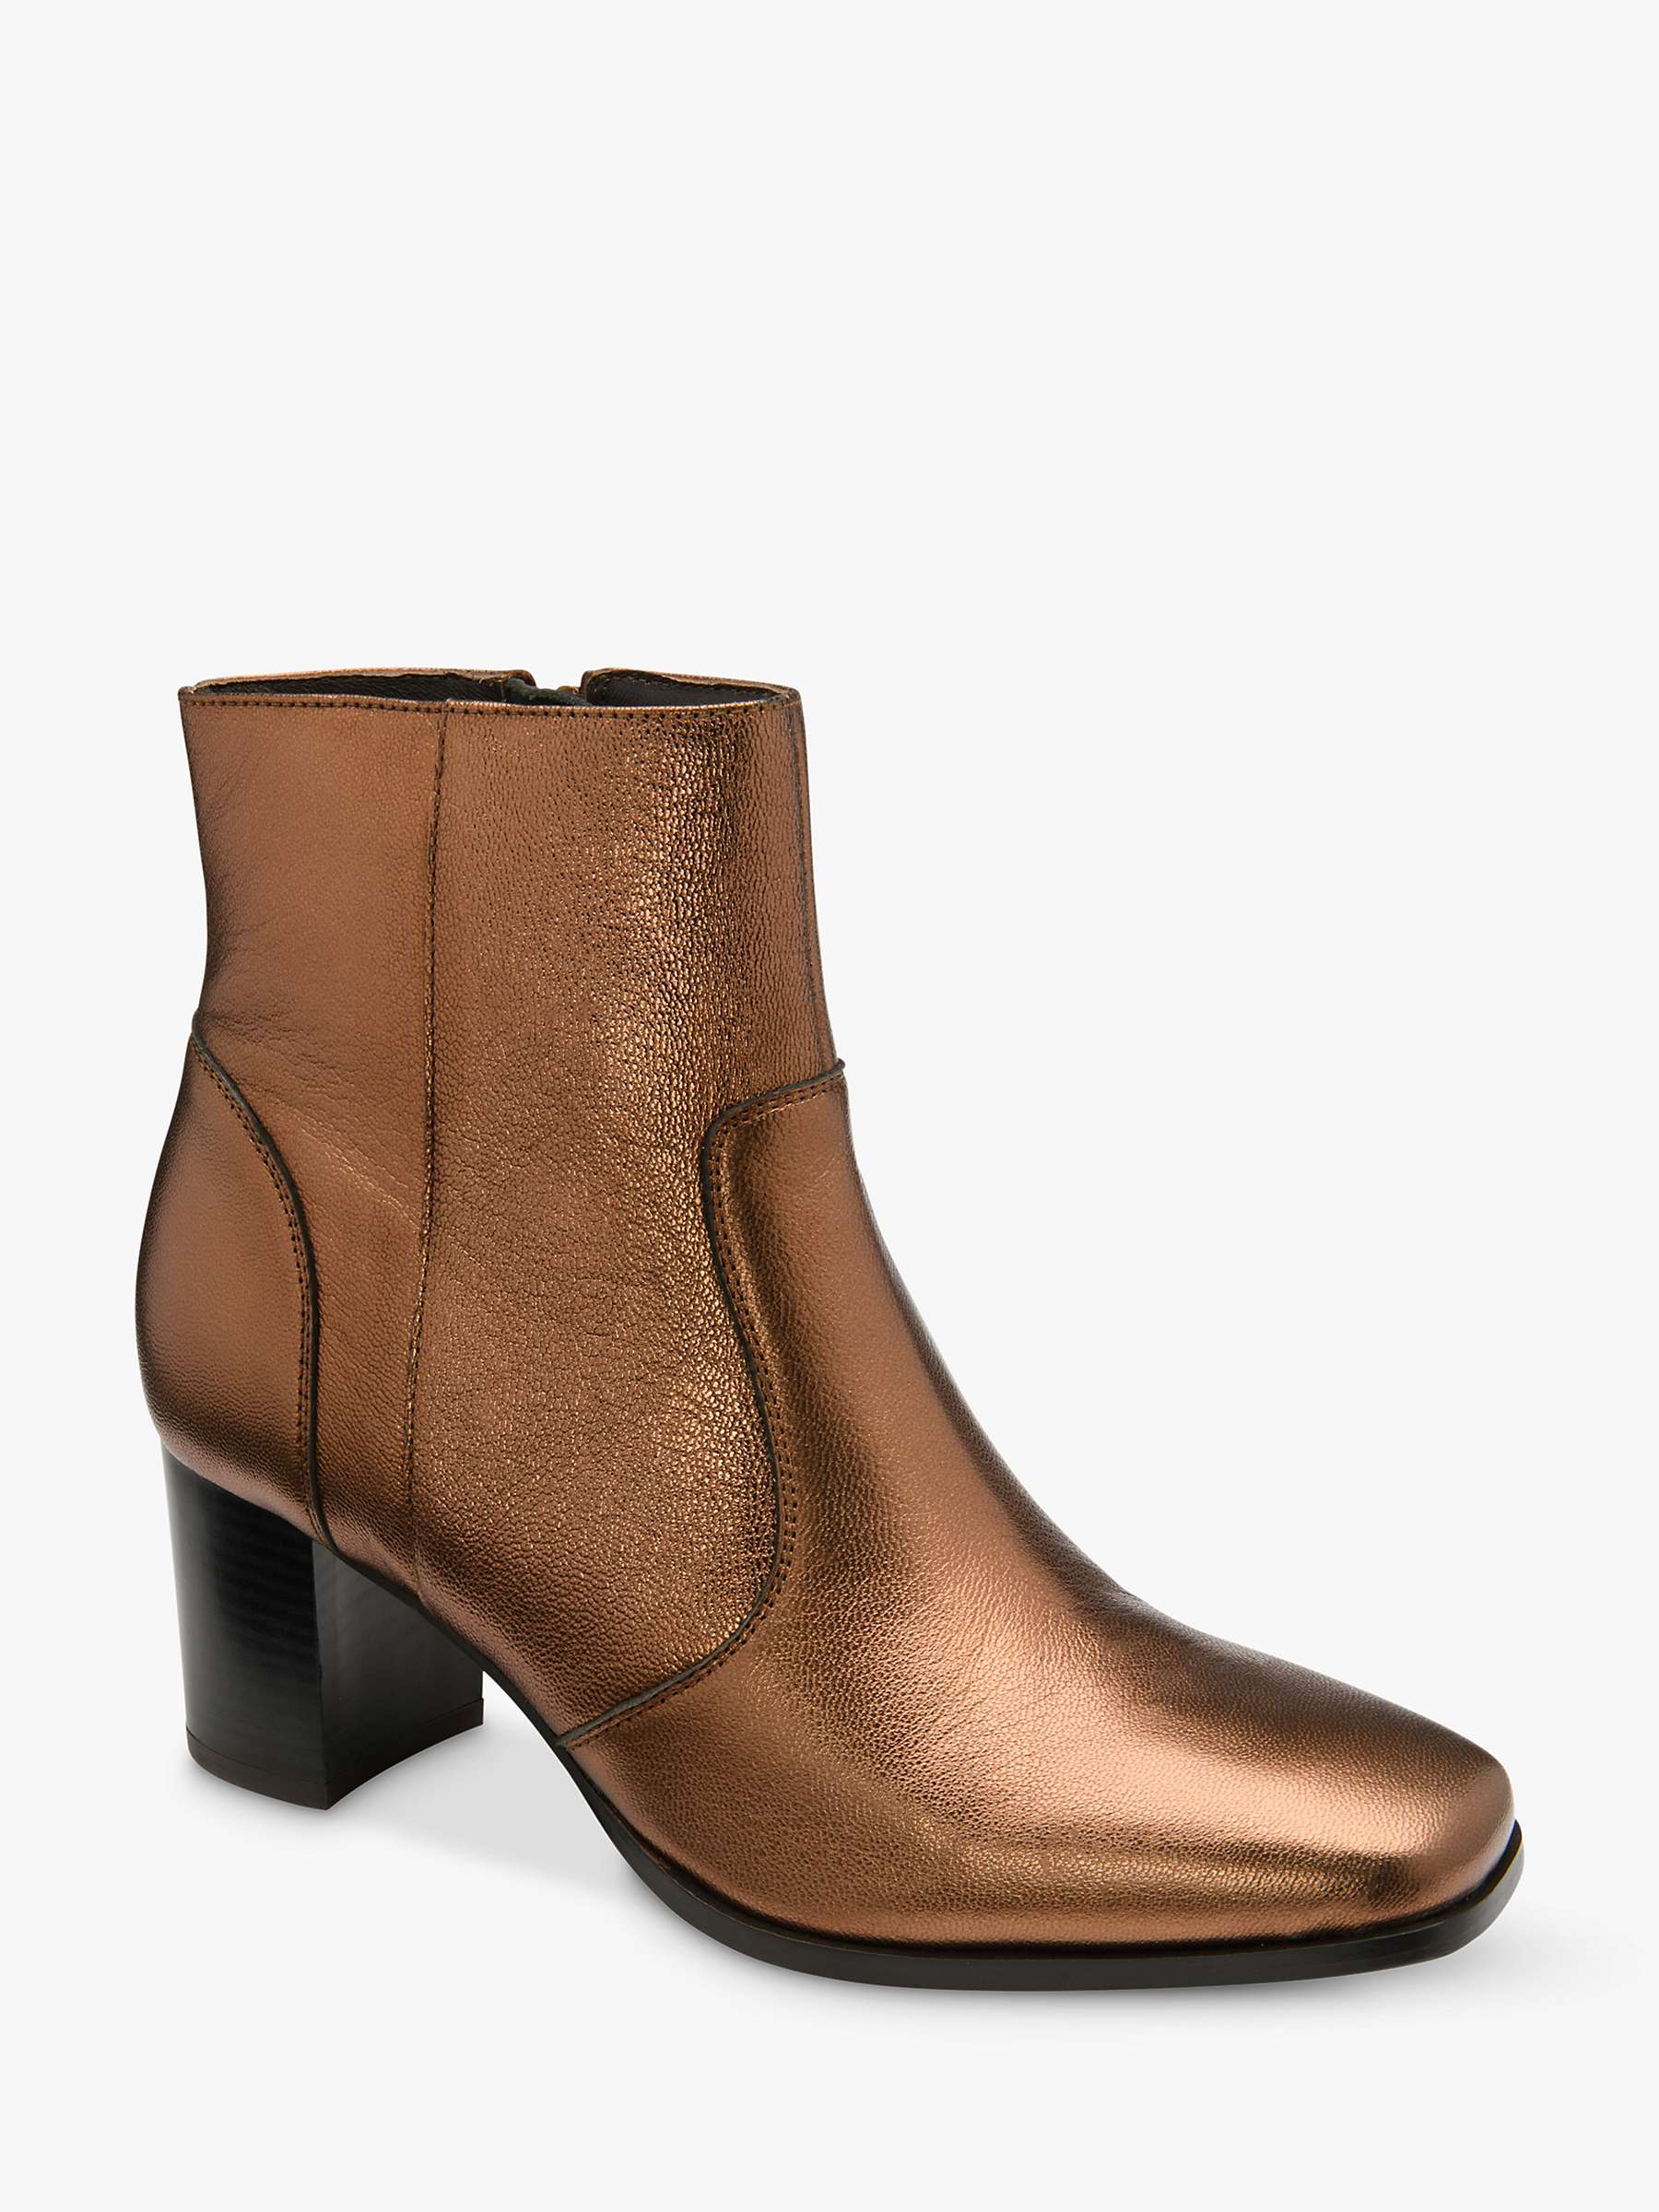 Buy Ravel Louth Leather Ankle Boots, Copper Online at johnlewis.com